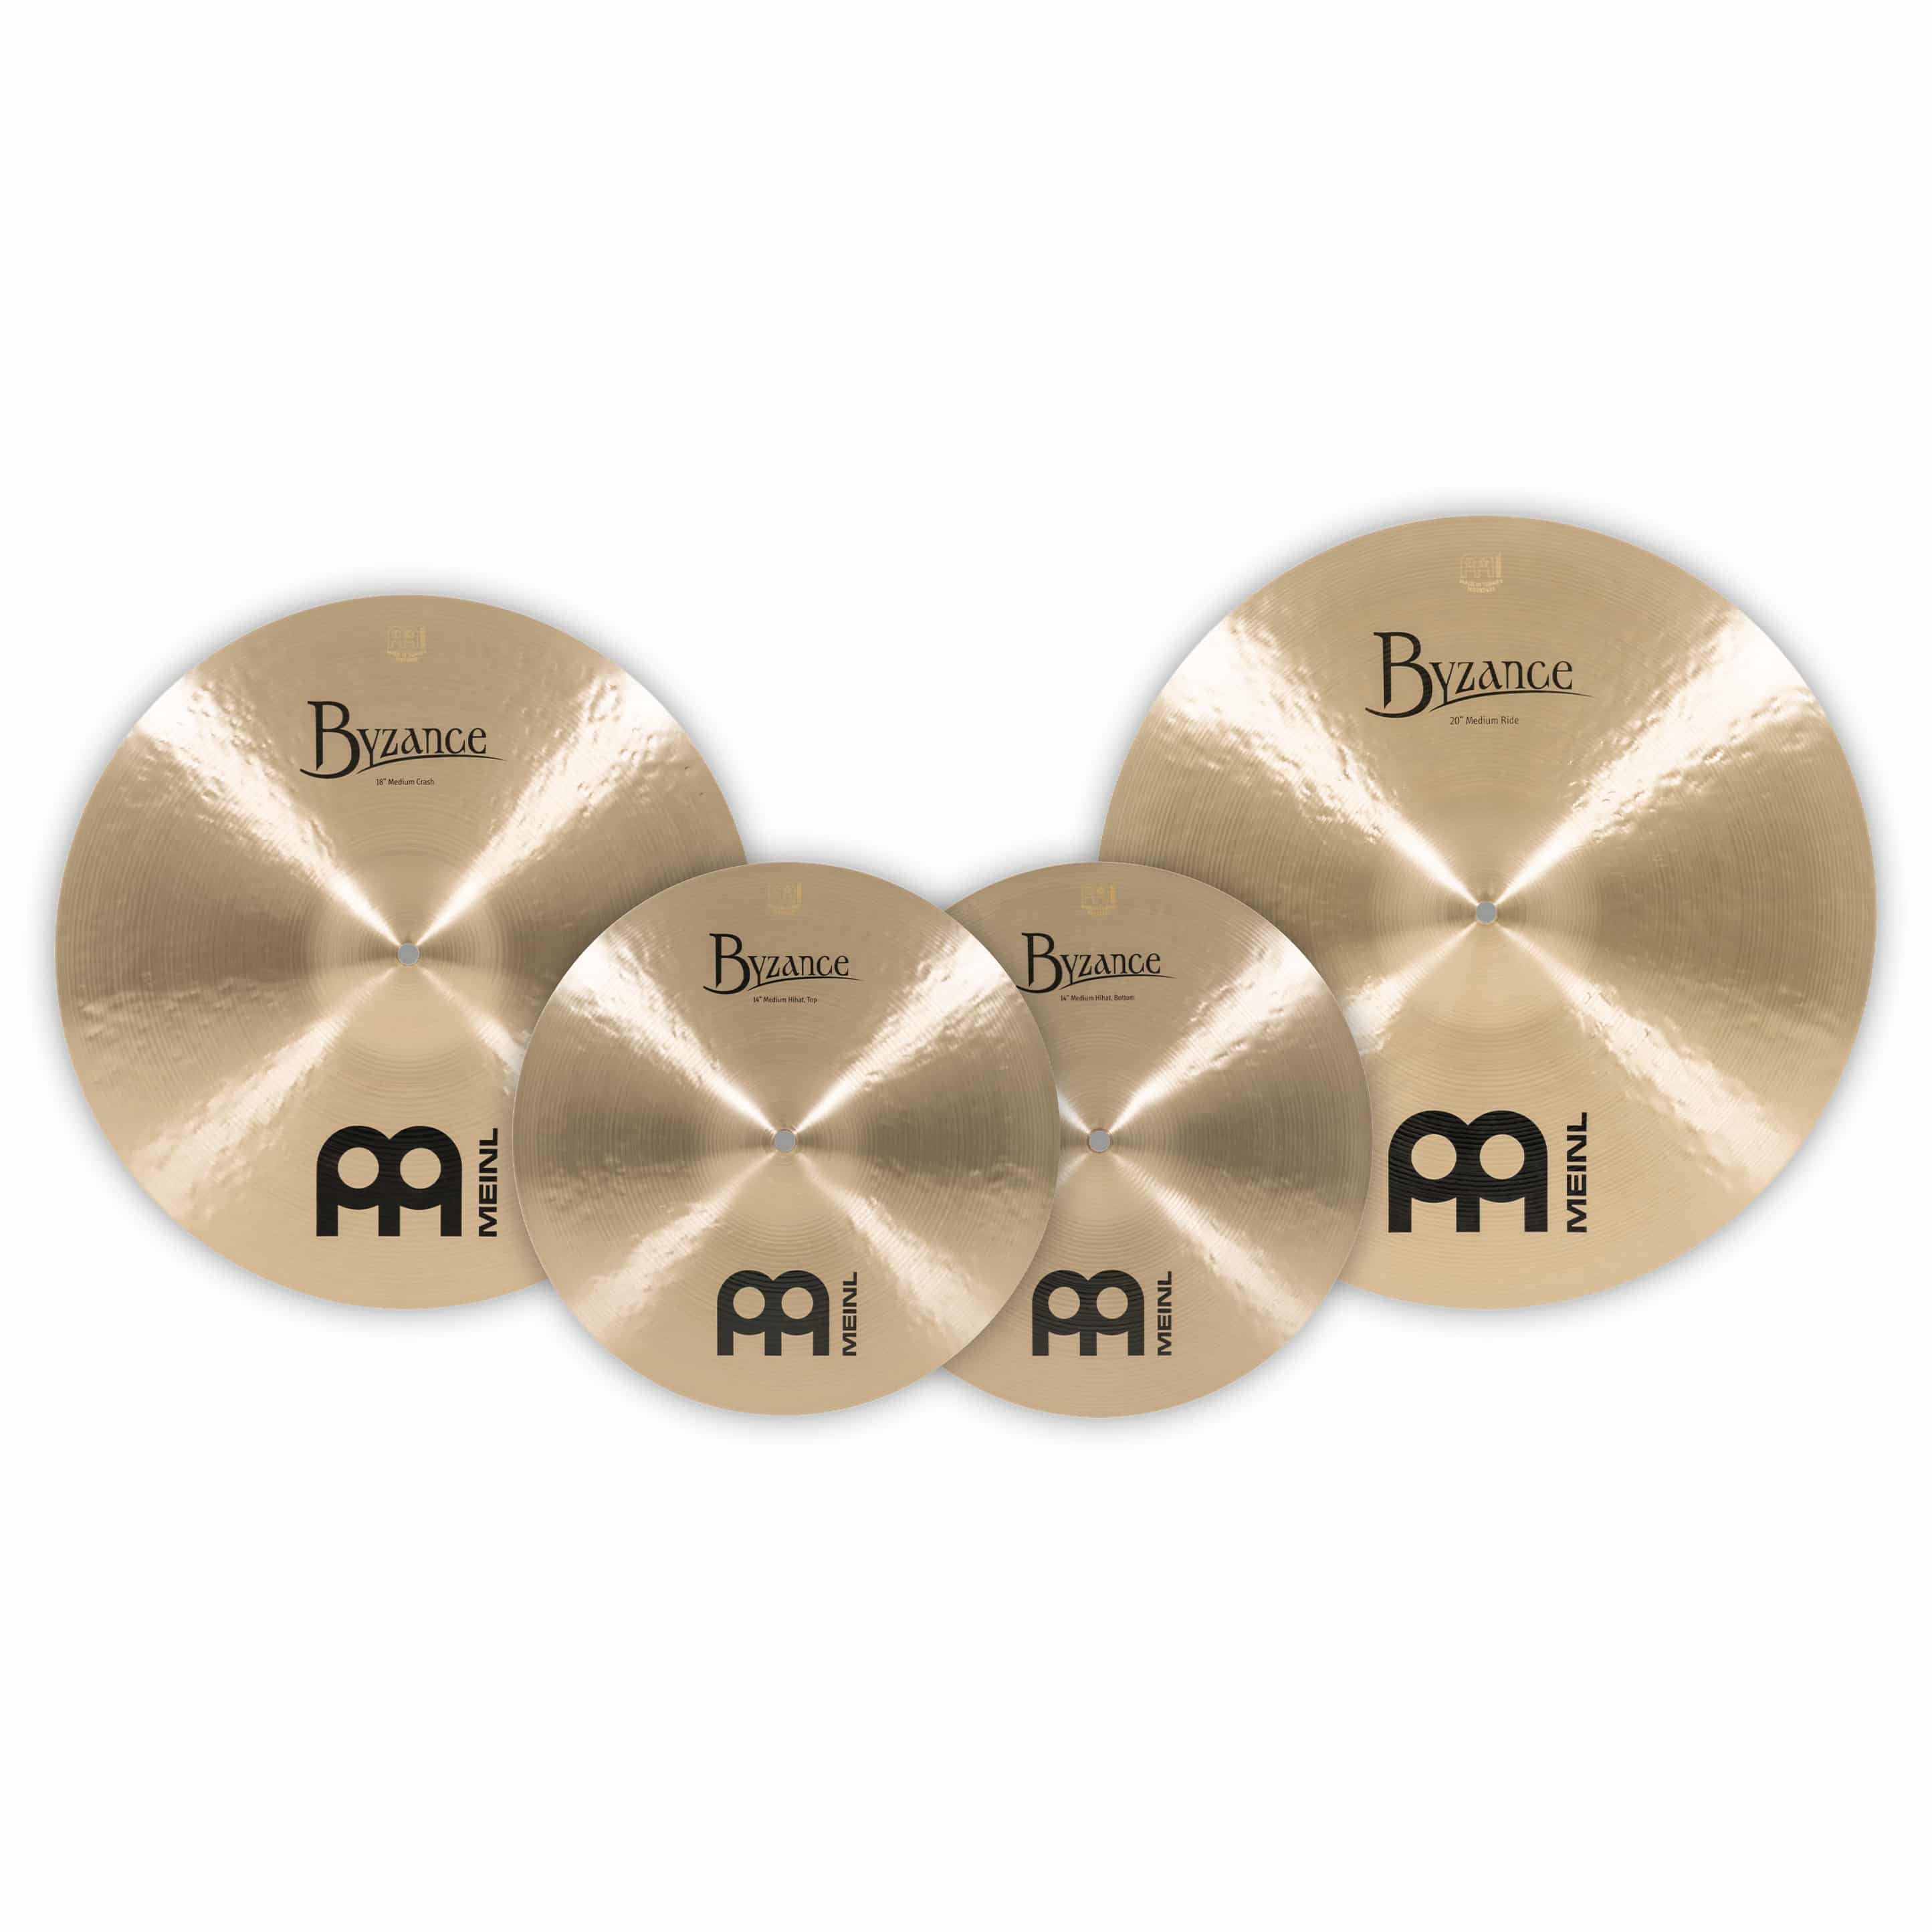 Meinl Cymbals BT-CS1 - Byzance Traditional Complete Cymbal Set 1